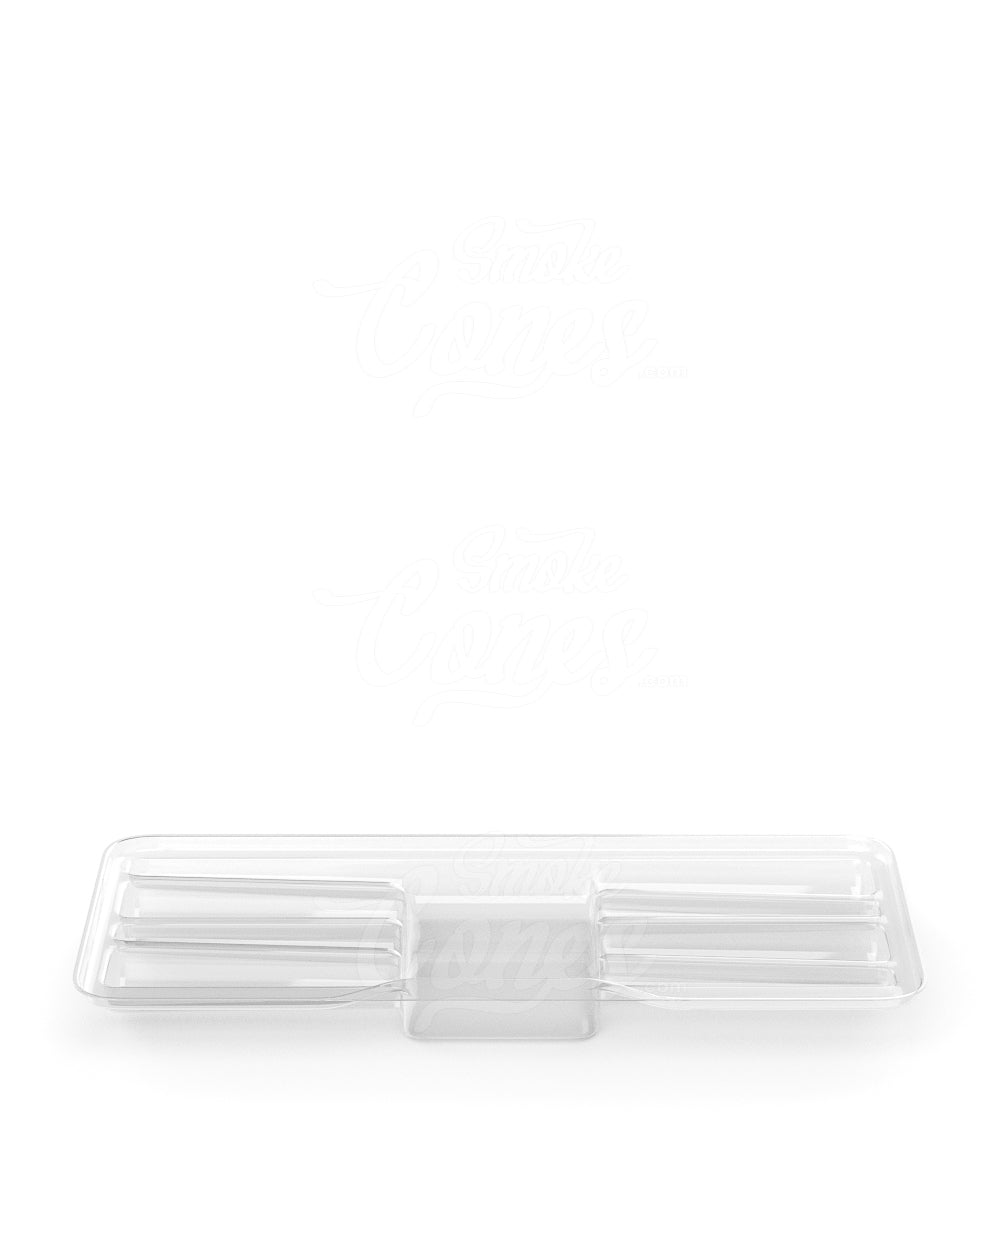 Clear Edible & Joint Box Plastic Insert Tray for 4 King Size 109mm Pre Rolled Cones 100/Box - 4